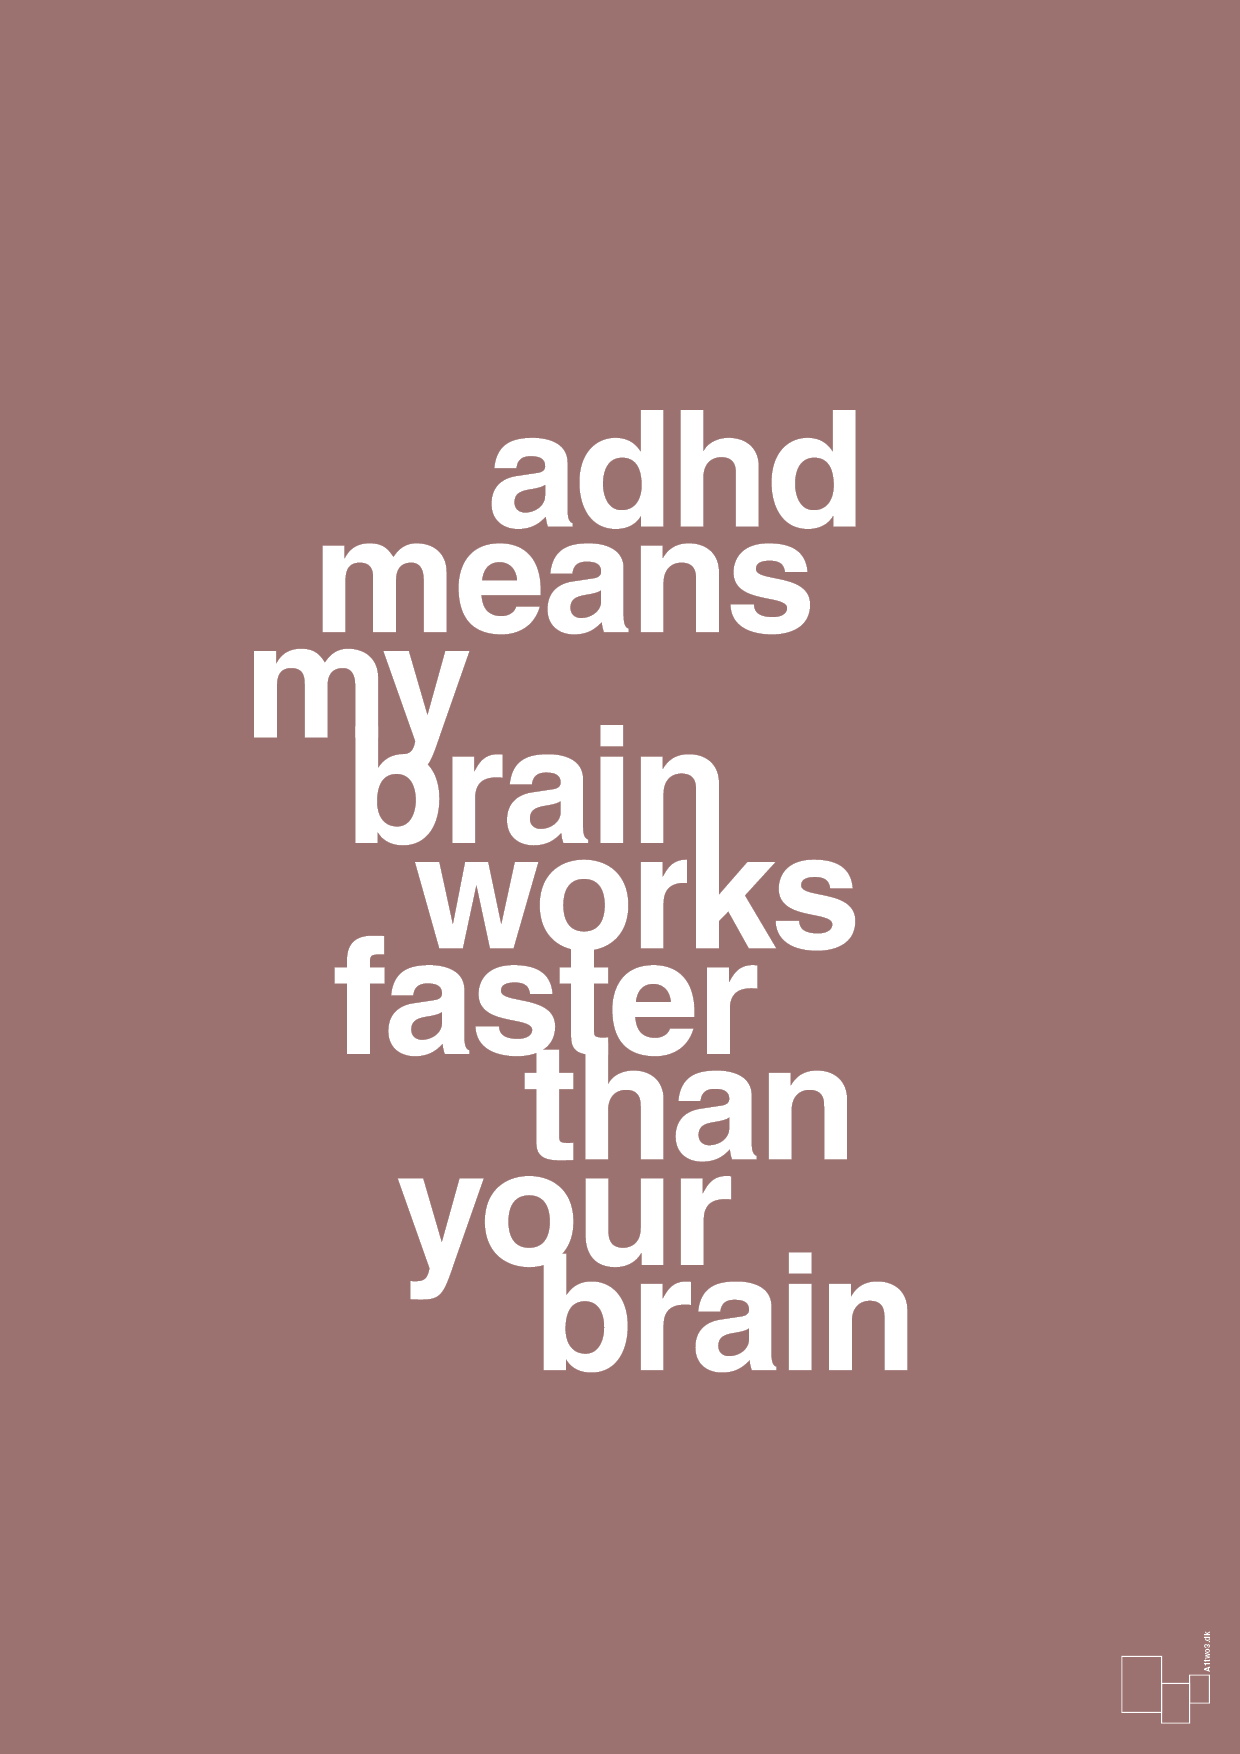 adhd means my brain works faster than your brain - Plakat med Samfund i Plum